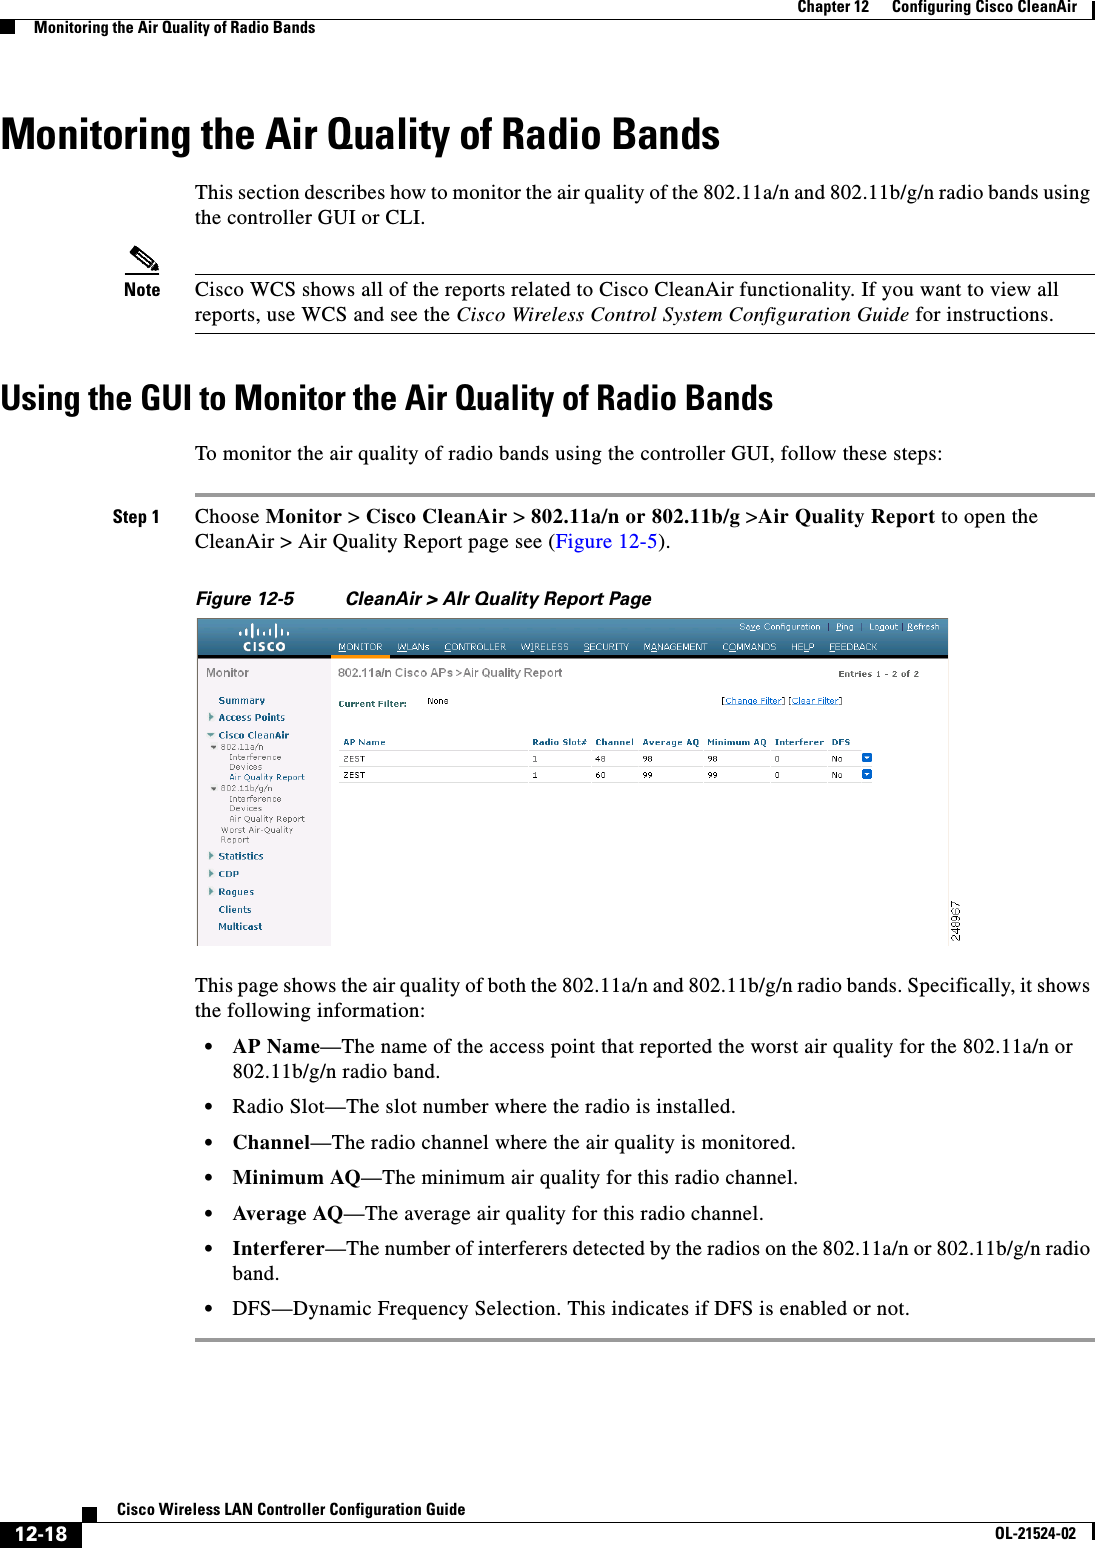  12-18Cisco Wireless LAN Controller Configuration GuideOL-21524-02Chapter 12      Configuring Cisco CleanAirMonitoring the Air Quality of Radio BandsMonitoring the Air Quality of Radio BandsThis section describes how to monitor the air quality of the 802.11a/n and 802.11b/g/n radio bands using the controller GUI or CLI.Note Cisco WCS shows all of the reports related to Cisco CleanAir functionality. If you want to view all reports, use WCS and see the Cisco Wireless Control System Configuration Guide for instructions.Using the GUI to Monitor the Air Quality of Radio BandsTo monitor the air quality of radio bands using the controller GUI, follow these steps:Step 1 Choose Monitor &gt; Cisco CleanAir &gt; 802.11a/n or 802.11b/g &gt;Air Quality Report to open the CleanAir &gt; Air Quality Report page see (Figure 12-5).Figure 12-5 CleanAir &gt; AIr Quality Report PageThis page shows the air quality of both the 802.11a/n and 802.11b/g/n radio bands. Specifically, it shows the following information:  • AP Name—The name of the access point that reported the worst air quality for the 802.11a/n or 802.11b/g/n radio band.  • Radio Slot—The slot number where the radio is installed.  • Channel—The radio channel where the air quality is monitored.  • Minimum AQ—The minimum air quality for this radio channel.   • Average AQ—The average air quality for this radio channel.   • Interferer—The number of interferers detected by the radios on the 802.11a/n or 802.11b/g/n radio band.  • DFS—Dynamic Frequency Selection. This indicates if DFS is enabled or not.